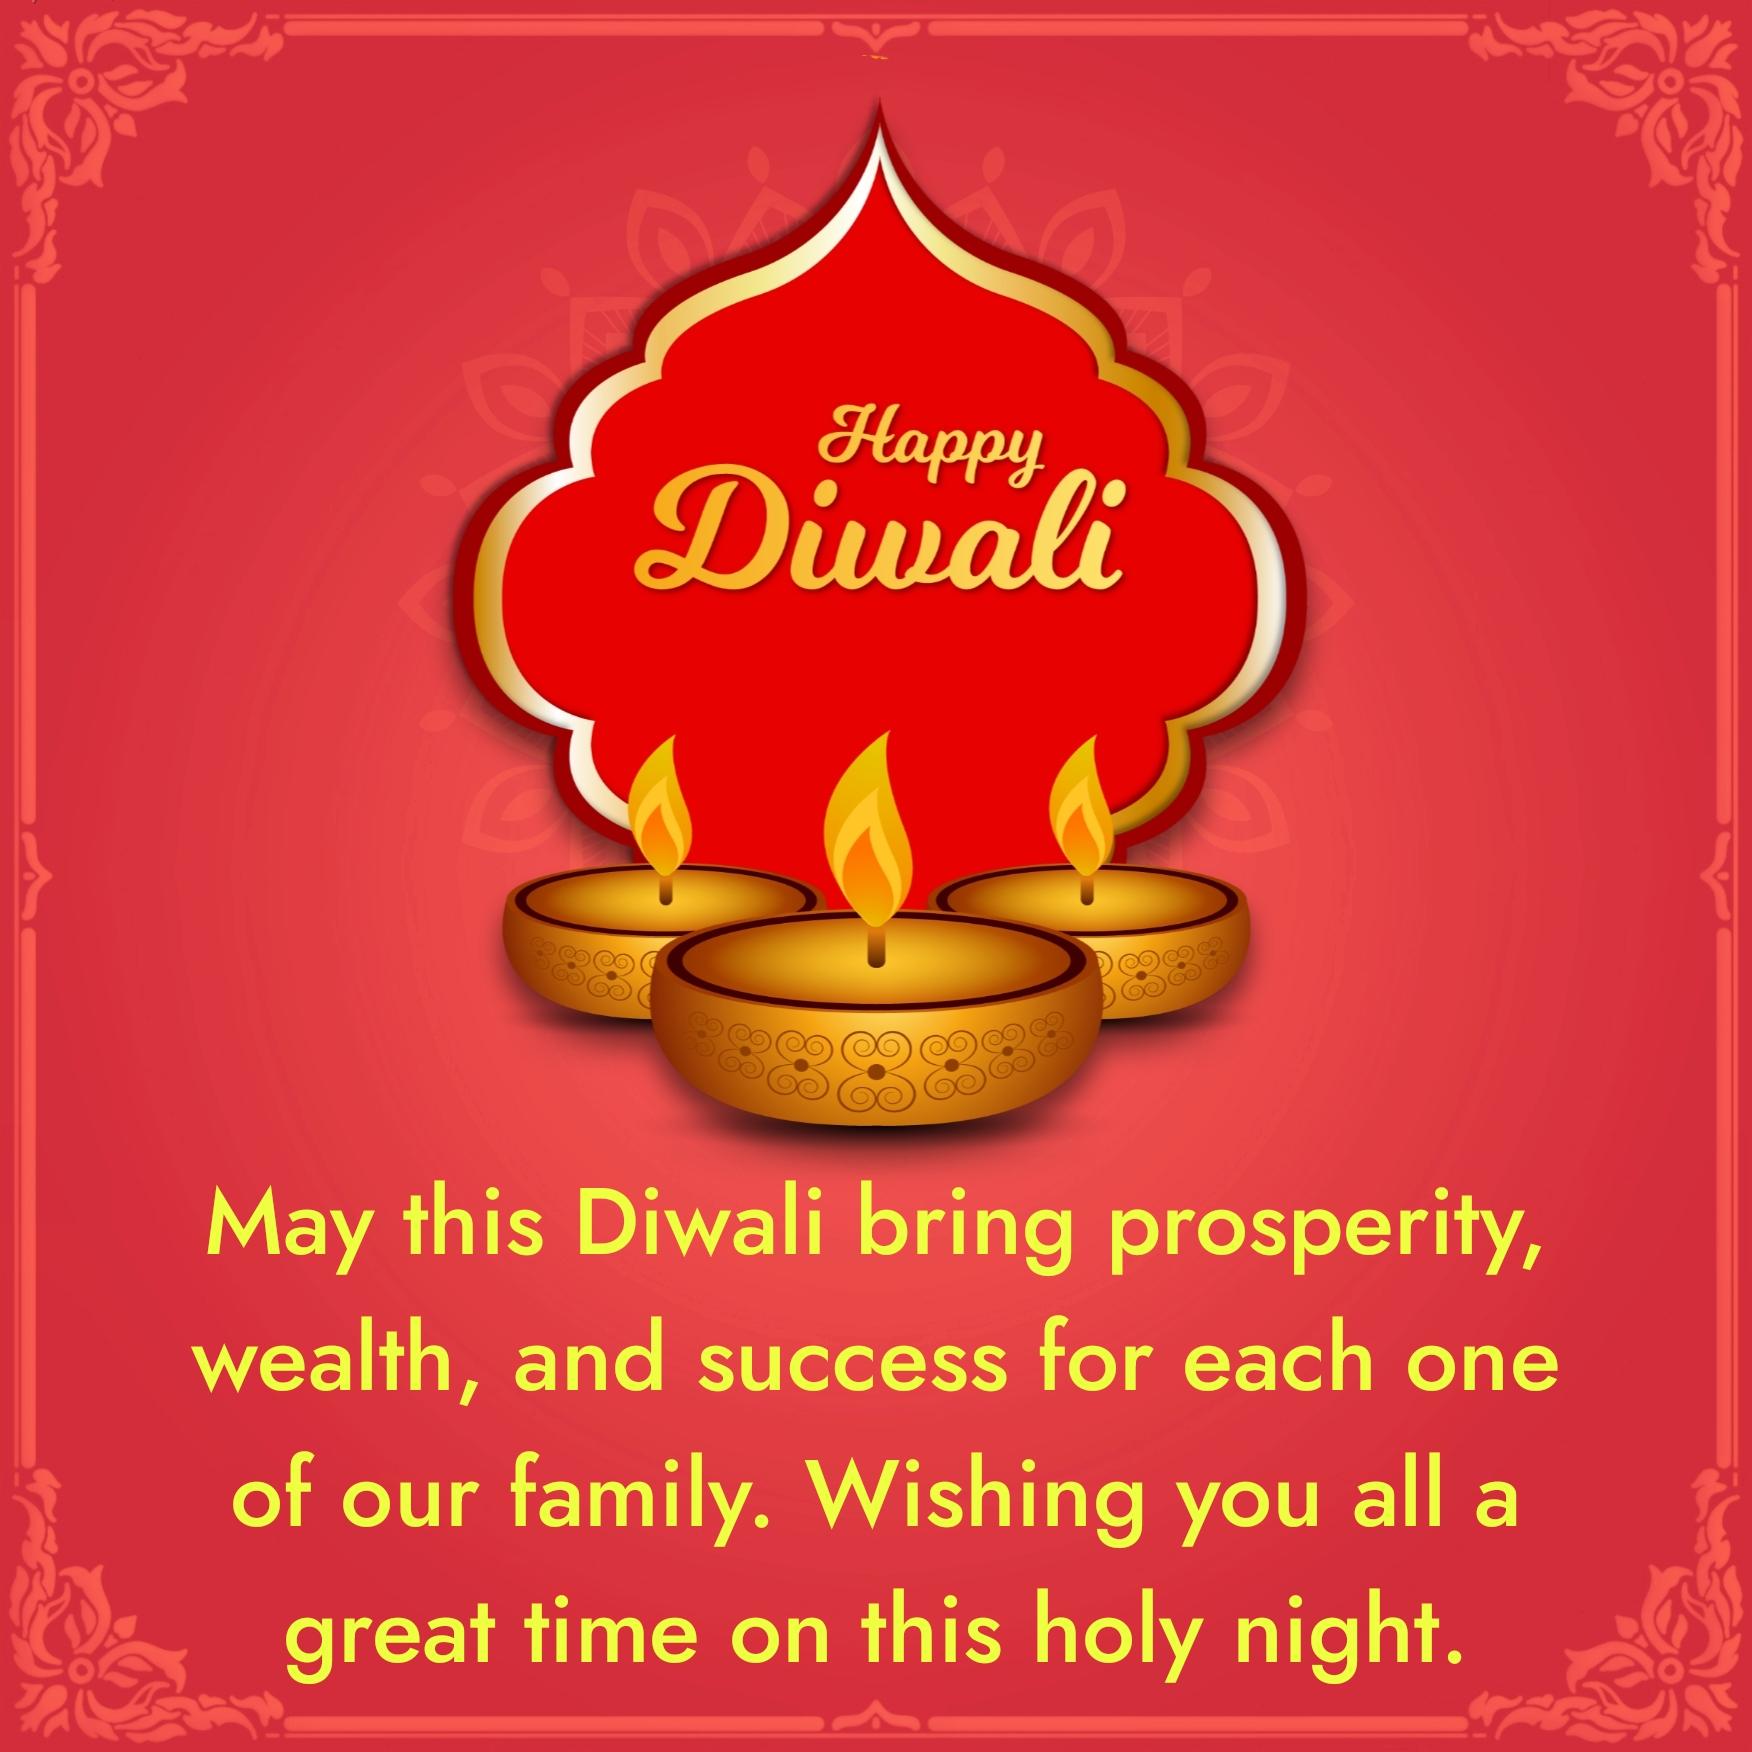 May this Diwali bring prosperity wealth and success